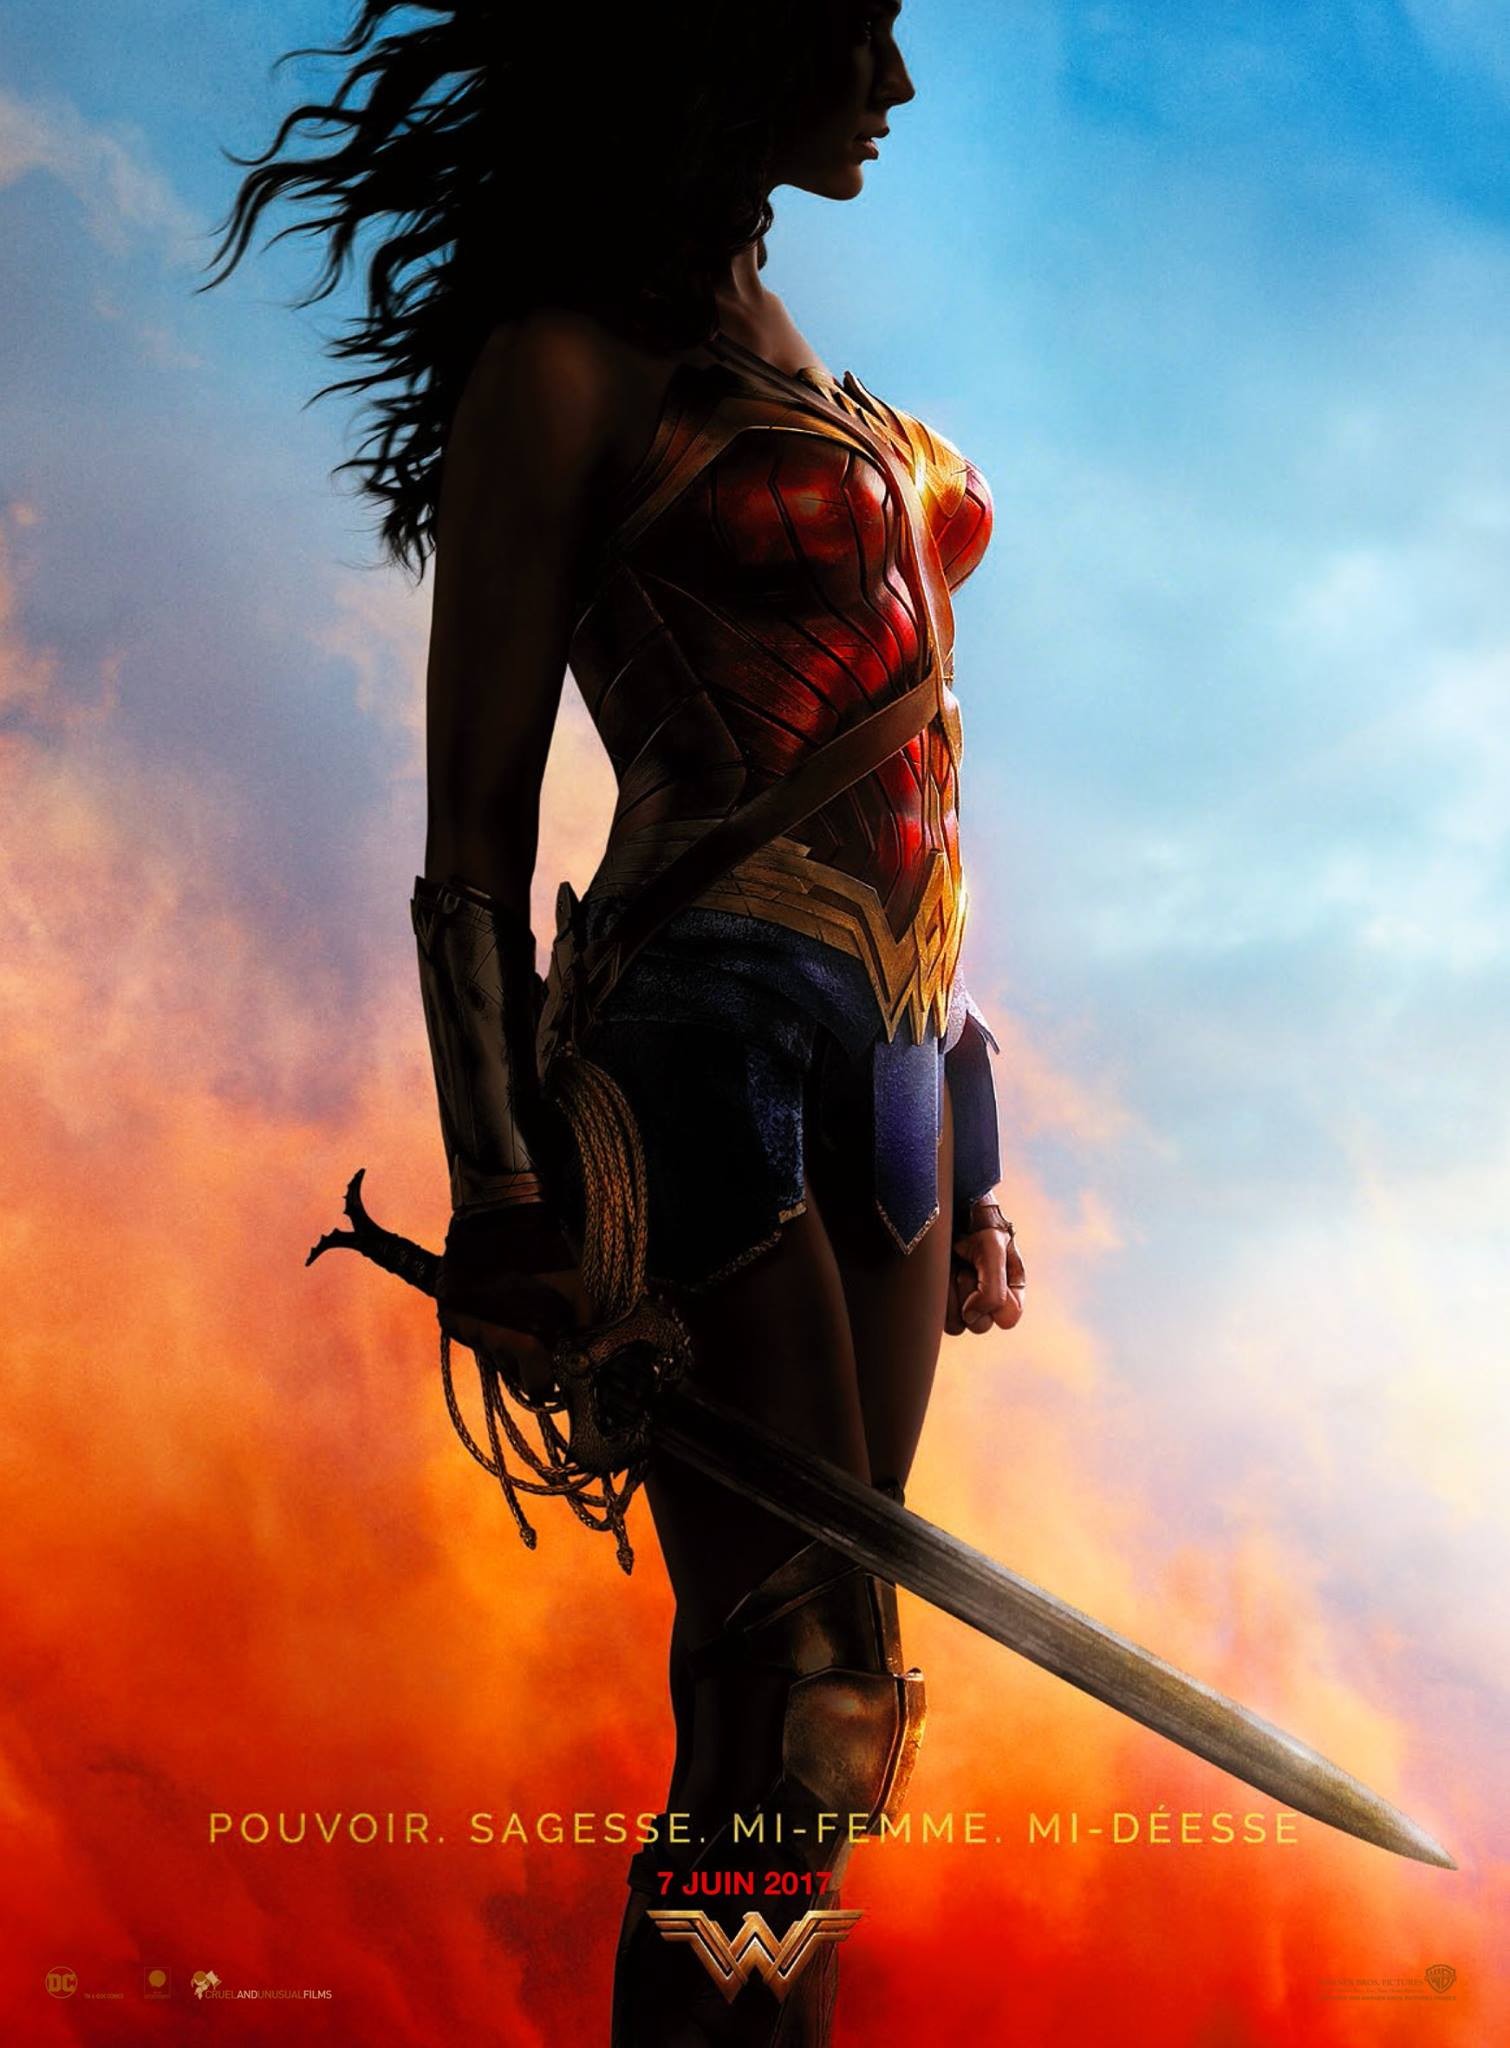 Patty Jenkins, James Cameron, Wonder Woman, Gal Gadot : Women can and should be EVERYTHING. If women always have to be hard, tough, troubled to be strong, and we aren’t free to be multidimensional, celebrate an icon, attractive and loving, then we haven’t come very far